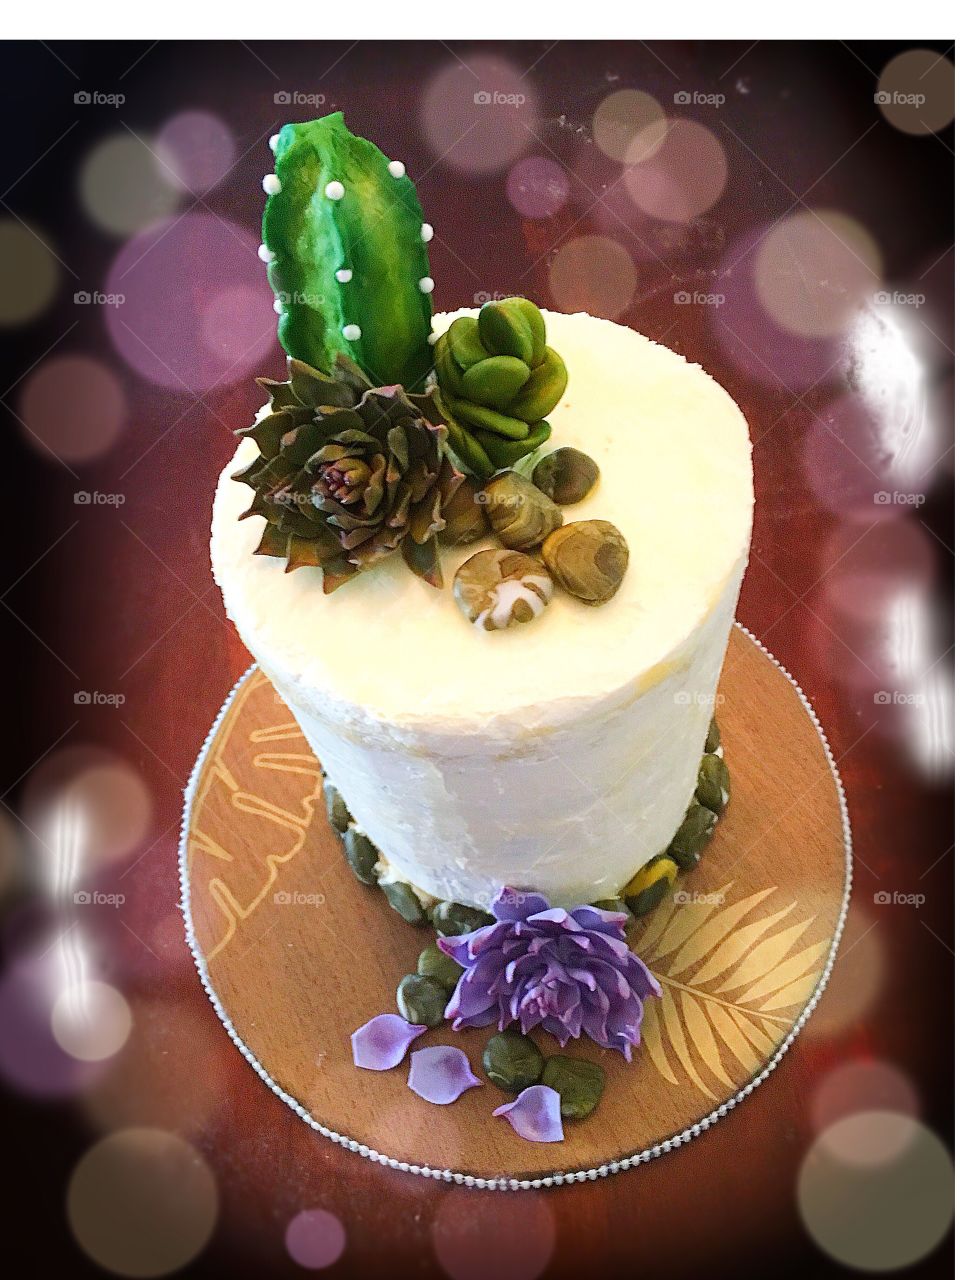 My first stunning naked cake accentuated with fondant cactus, succulents and marbled stones from scratch 